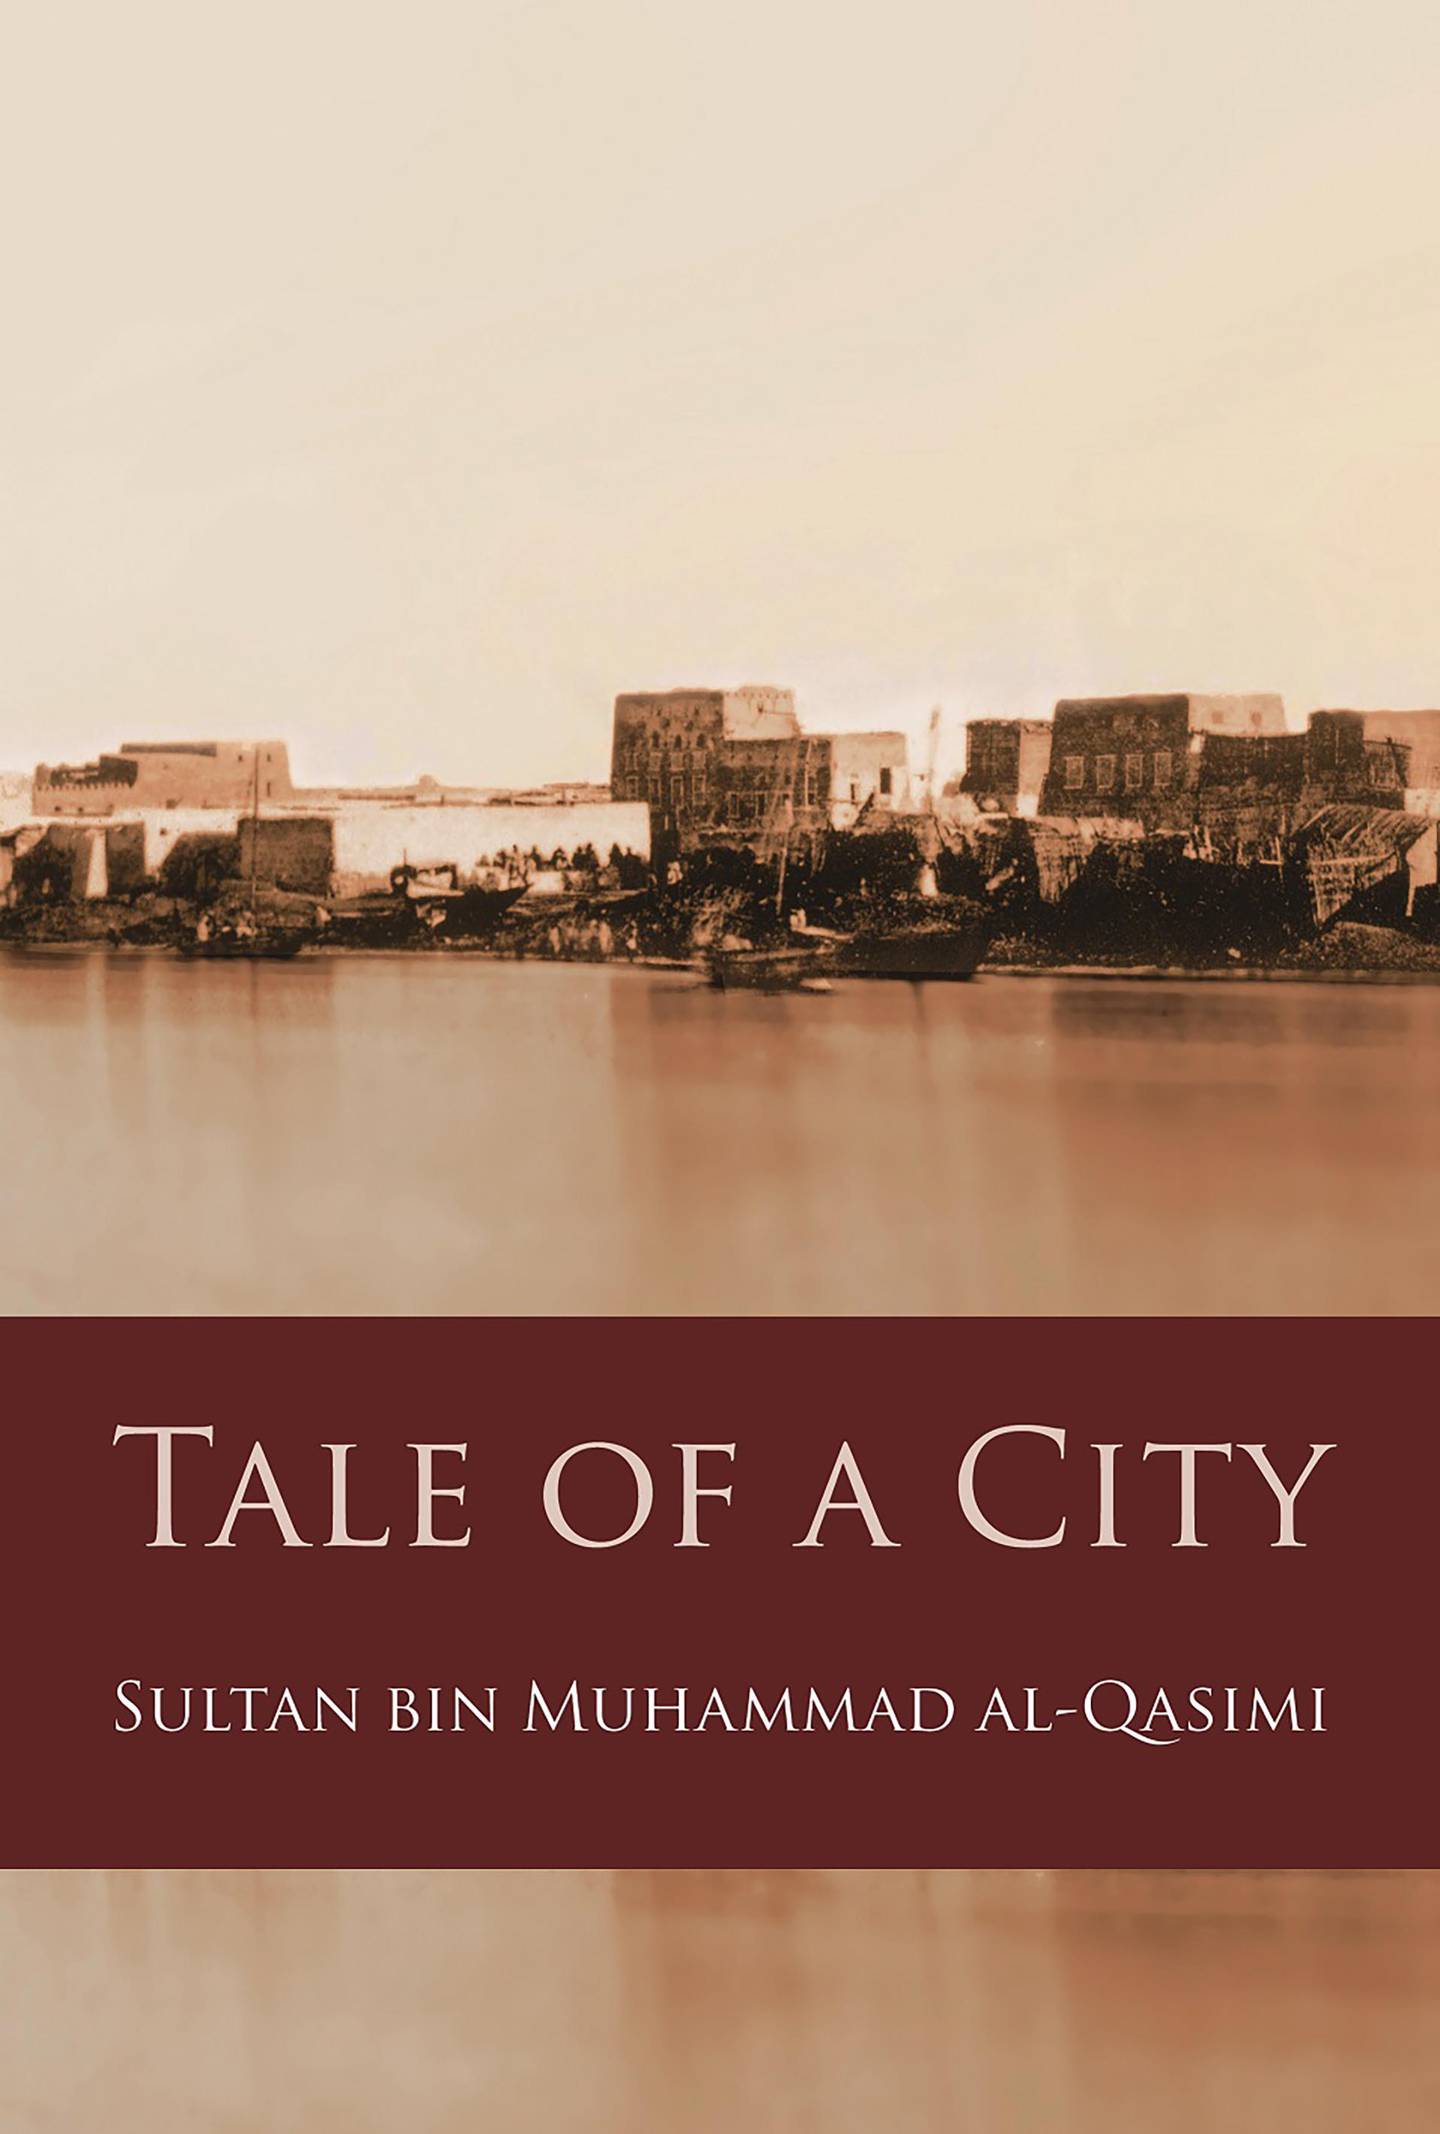 'Tale of a City' (2017) looks at how Sharjah evolved from humble beginnings to the cultural hub of today. 